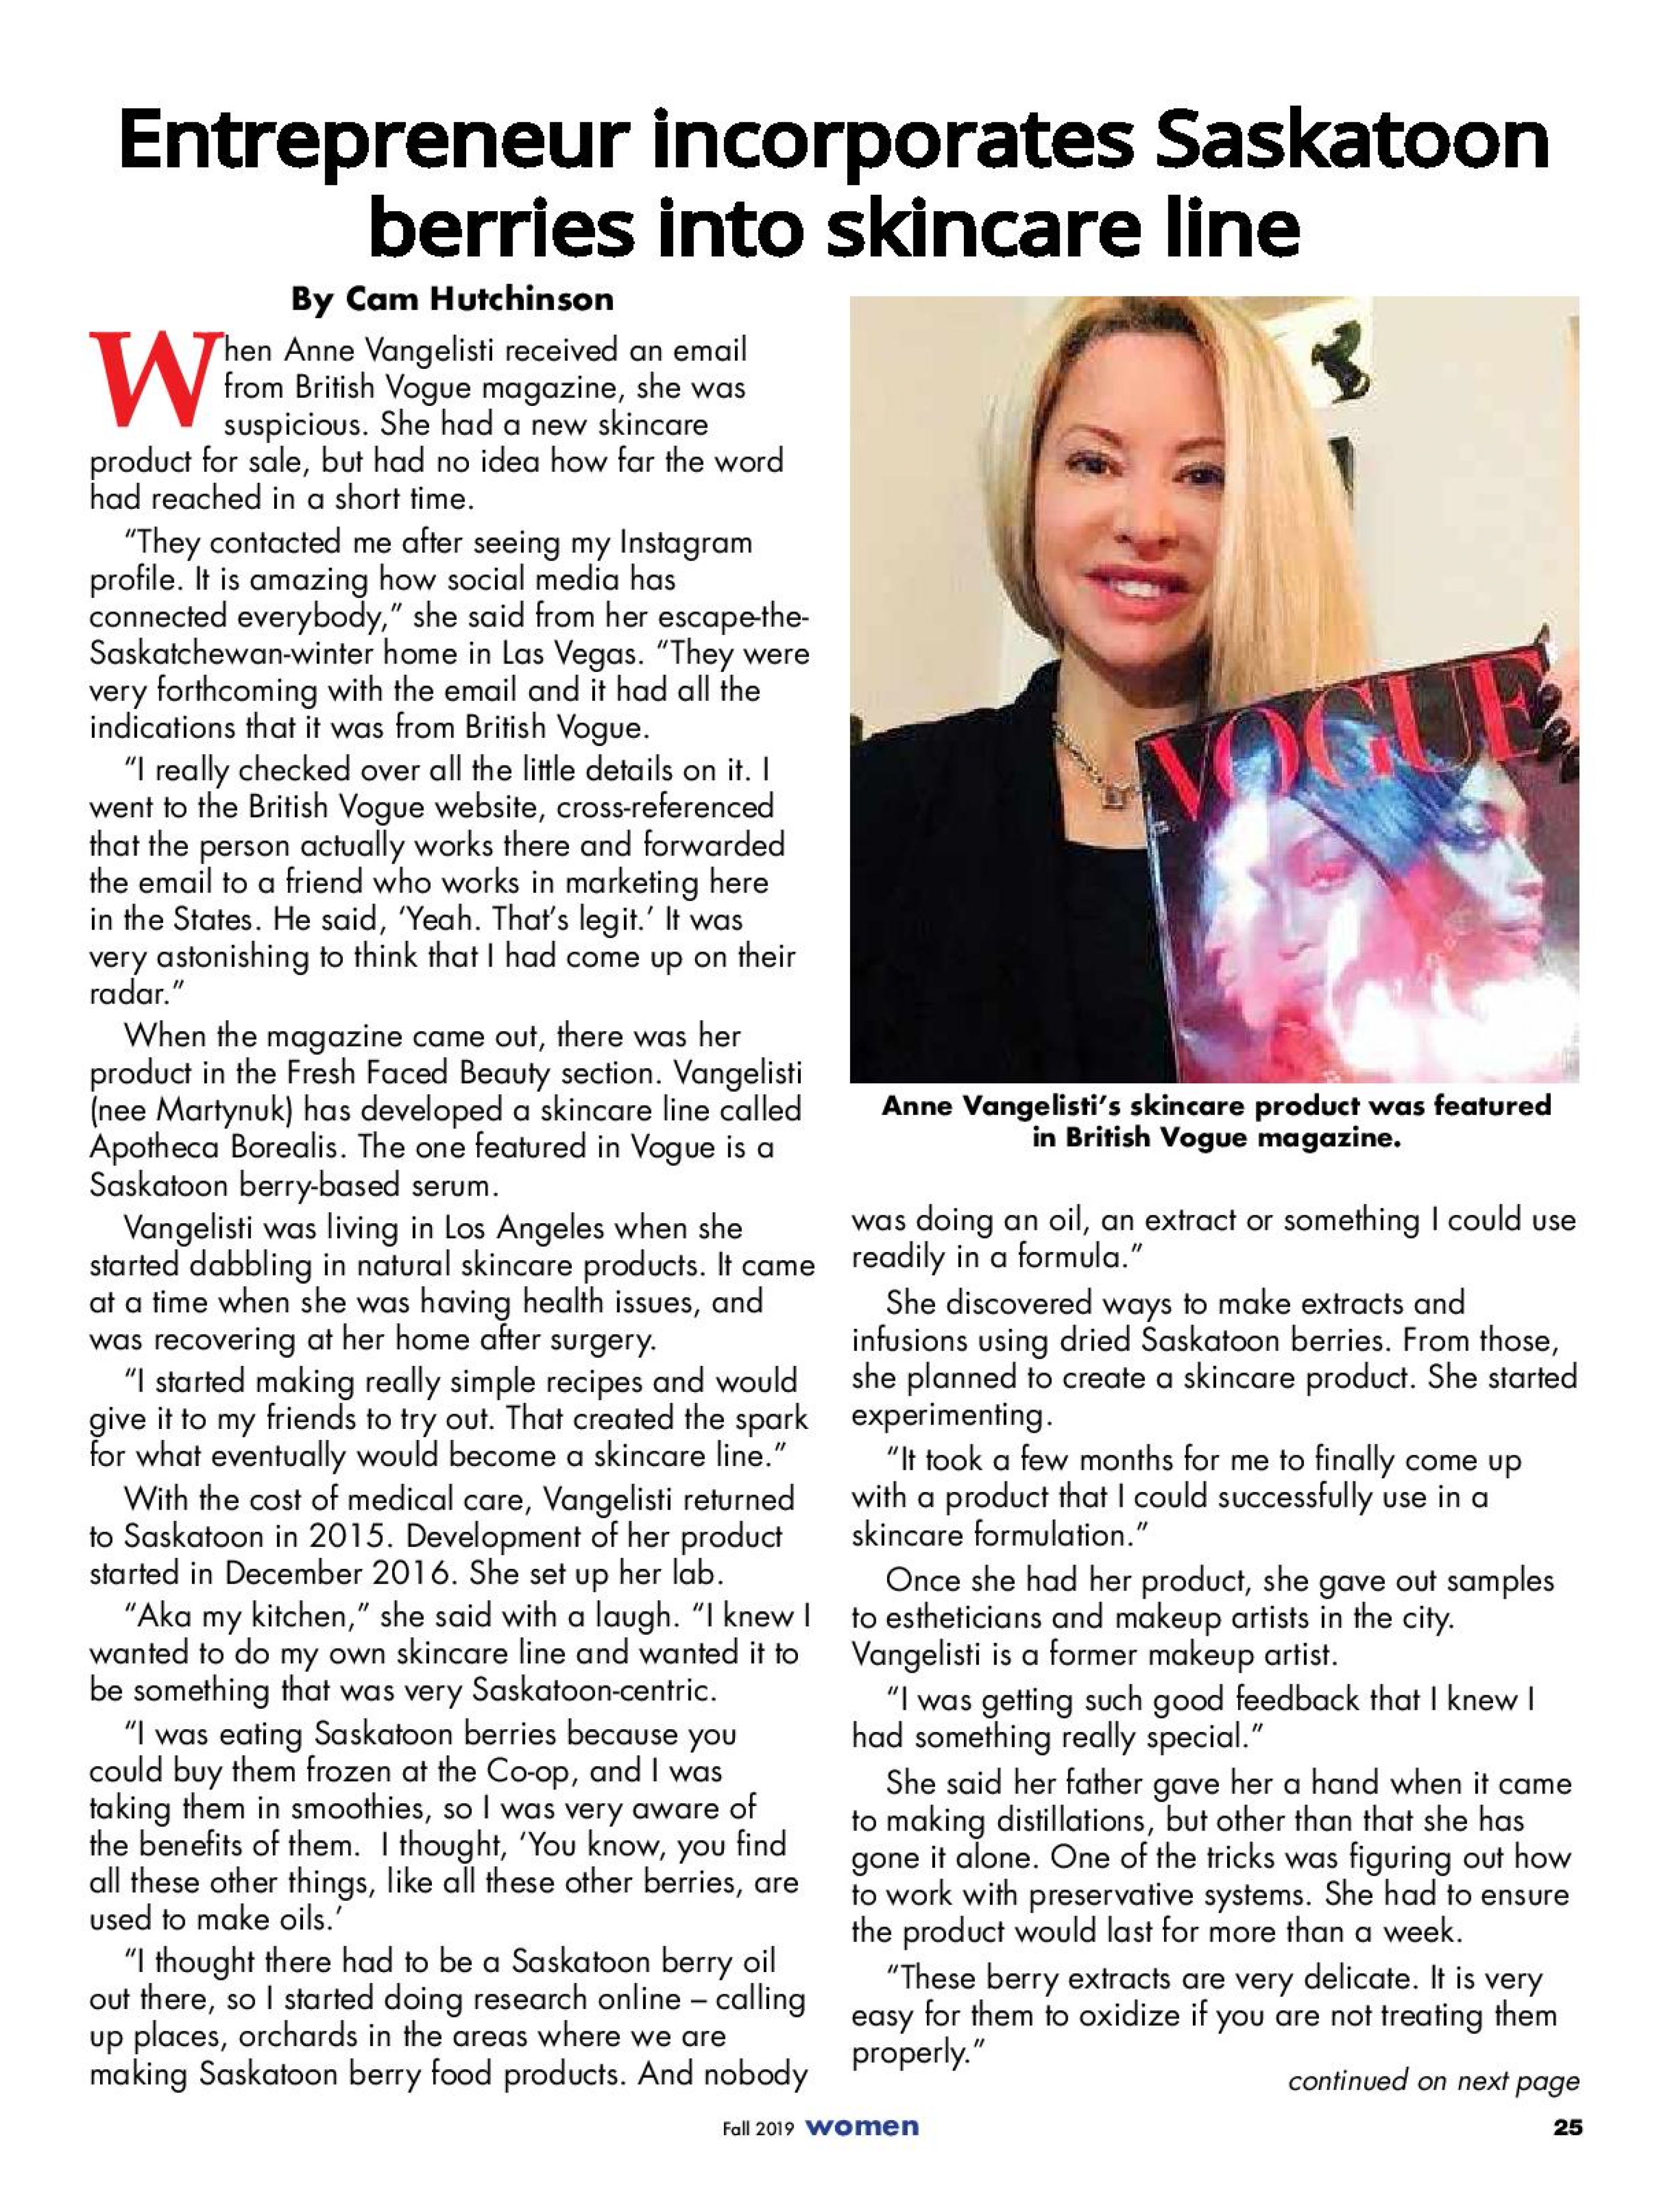 Women of Stoon_Sept 2019-page-025